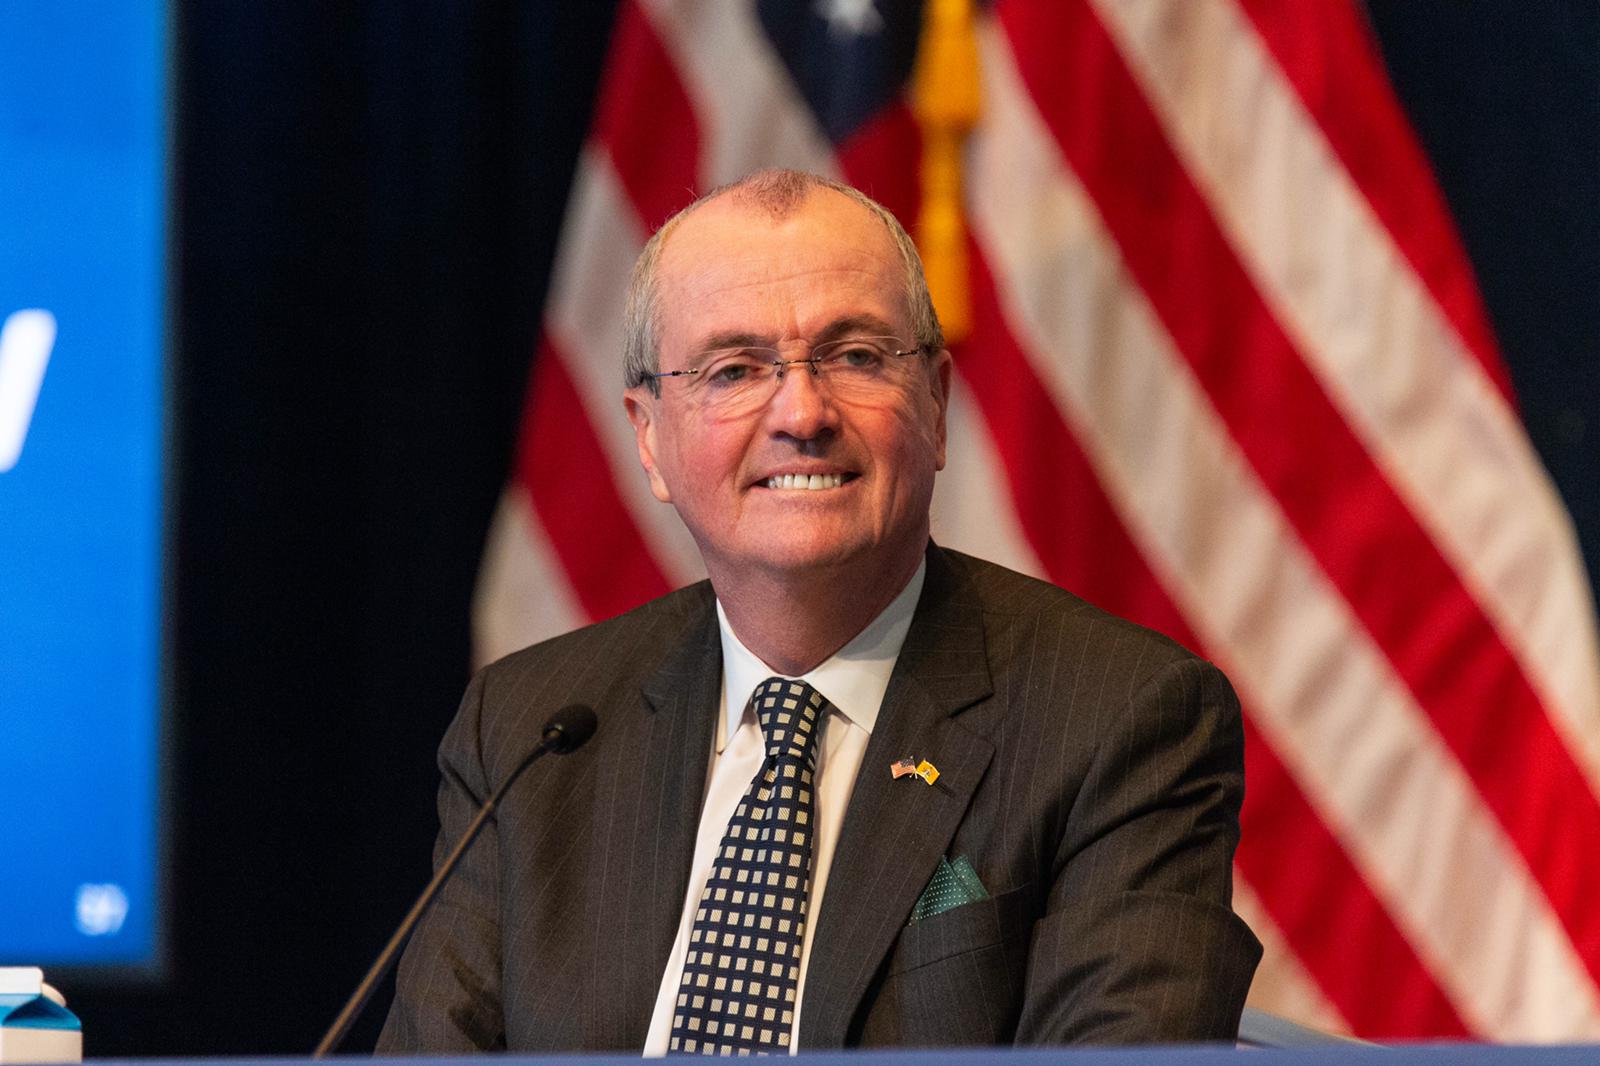 Governor Murphy Child Tax Credit